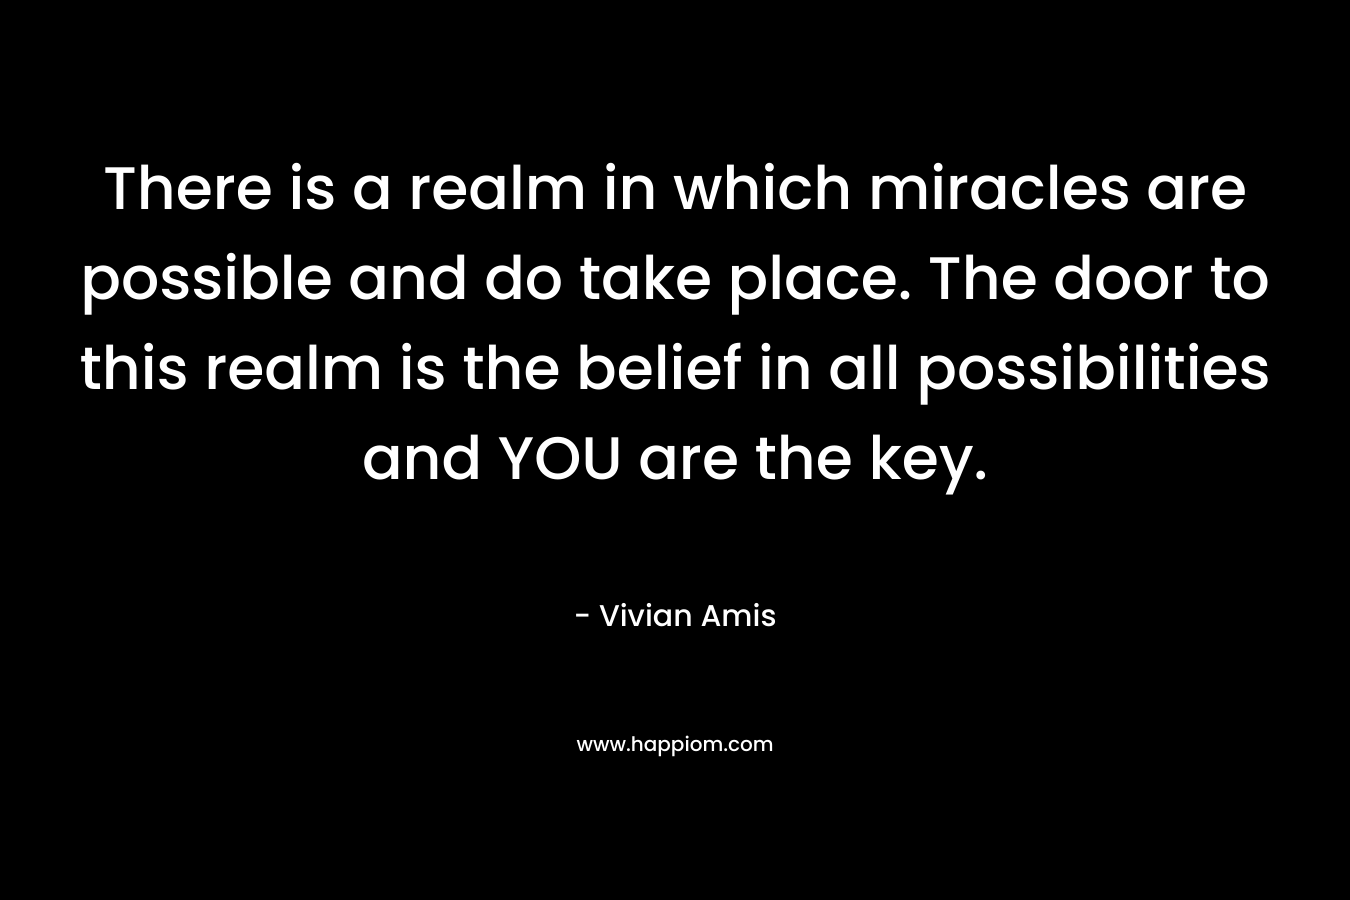 There is a realm in which miracles are possible and do take place. The door to this realm is the belief in all possibilities and YOU are the key.